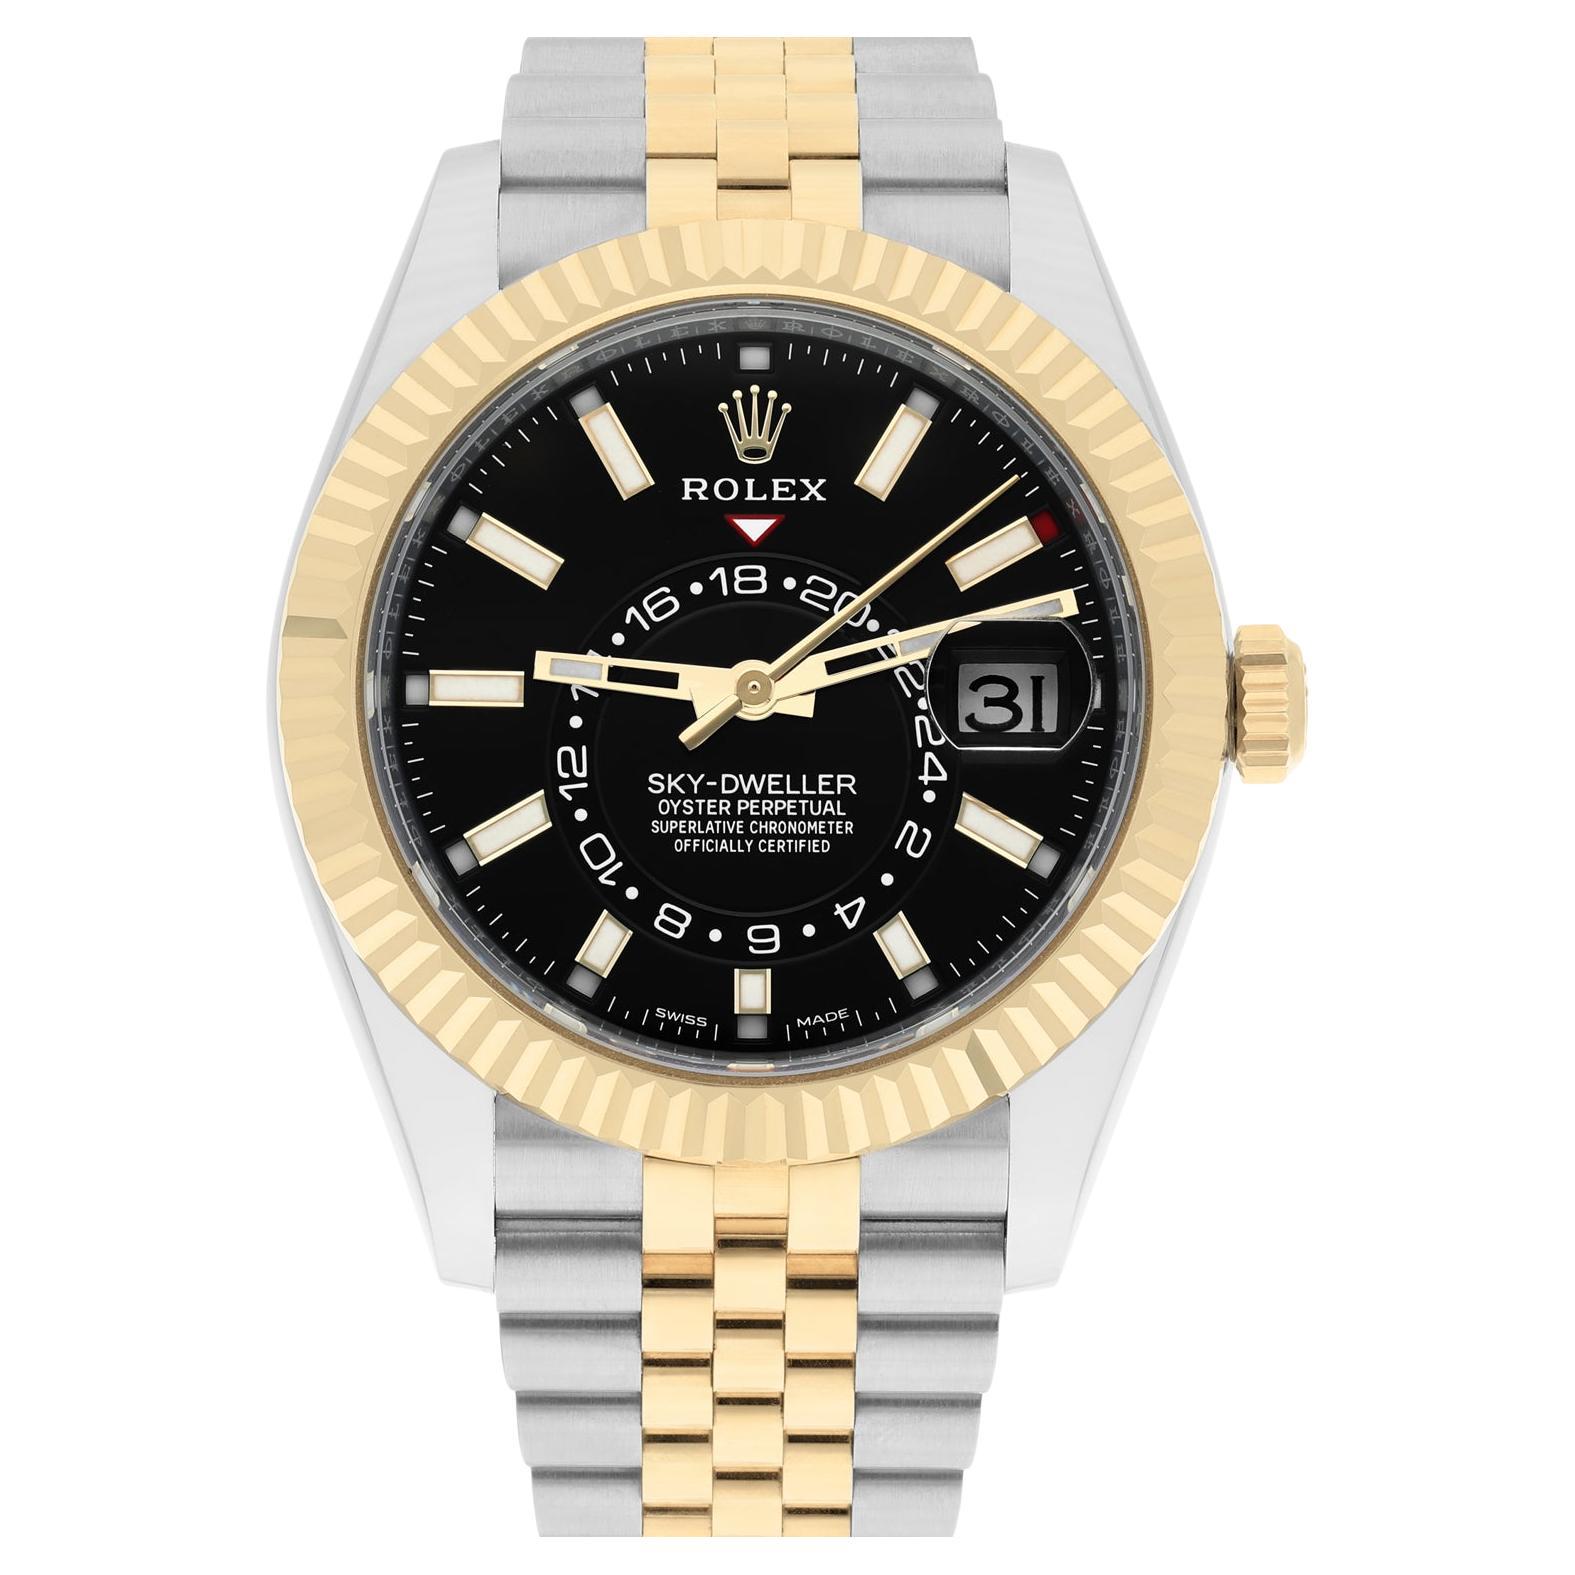 How do I change a Rolex watch battery?